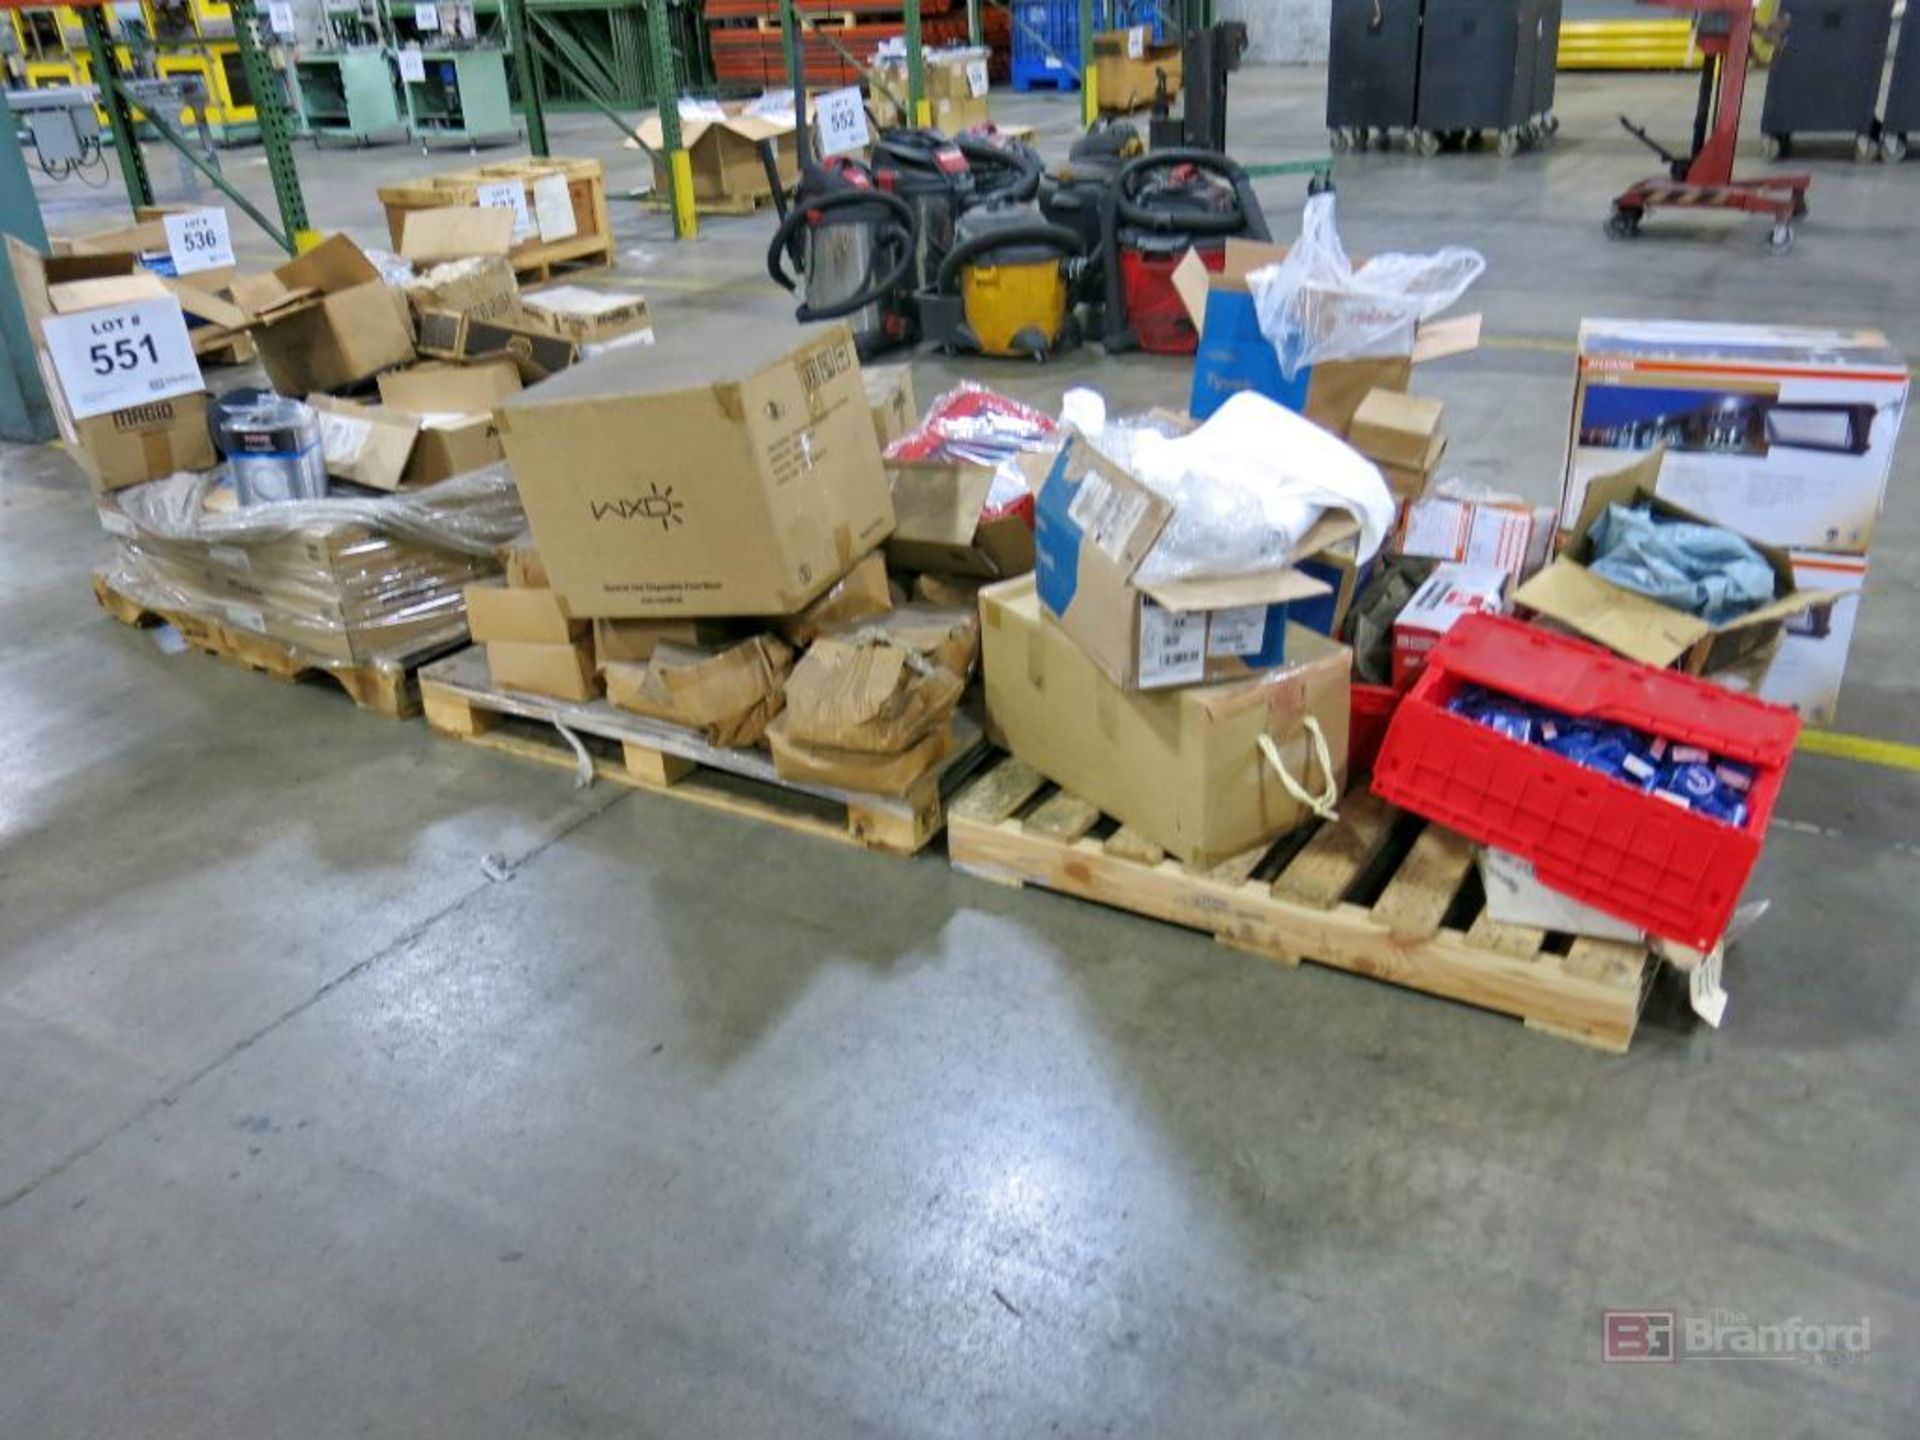 (3) Pallets of Lock Out Tag Out Materials, Numerous Other Industrial Related Items